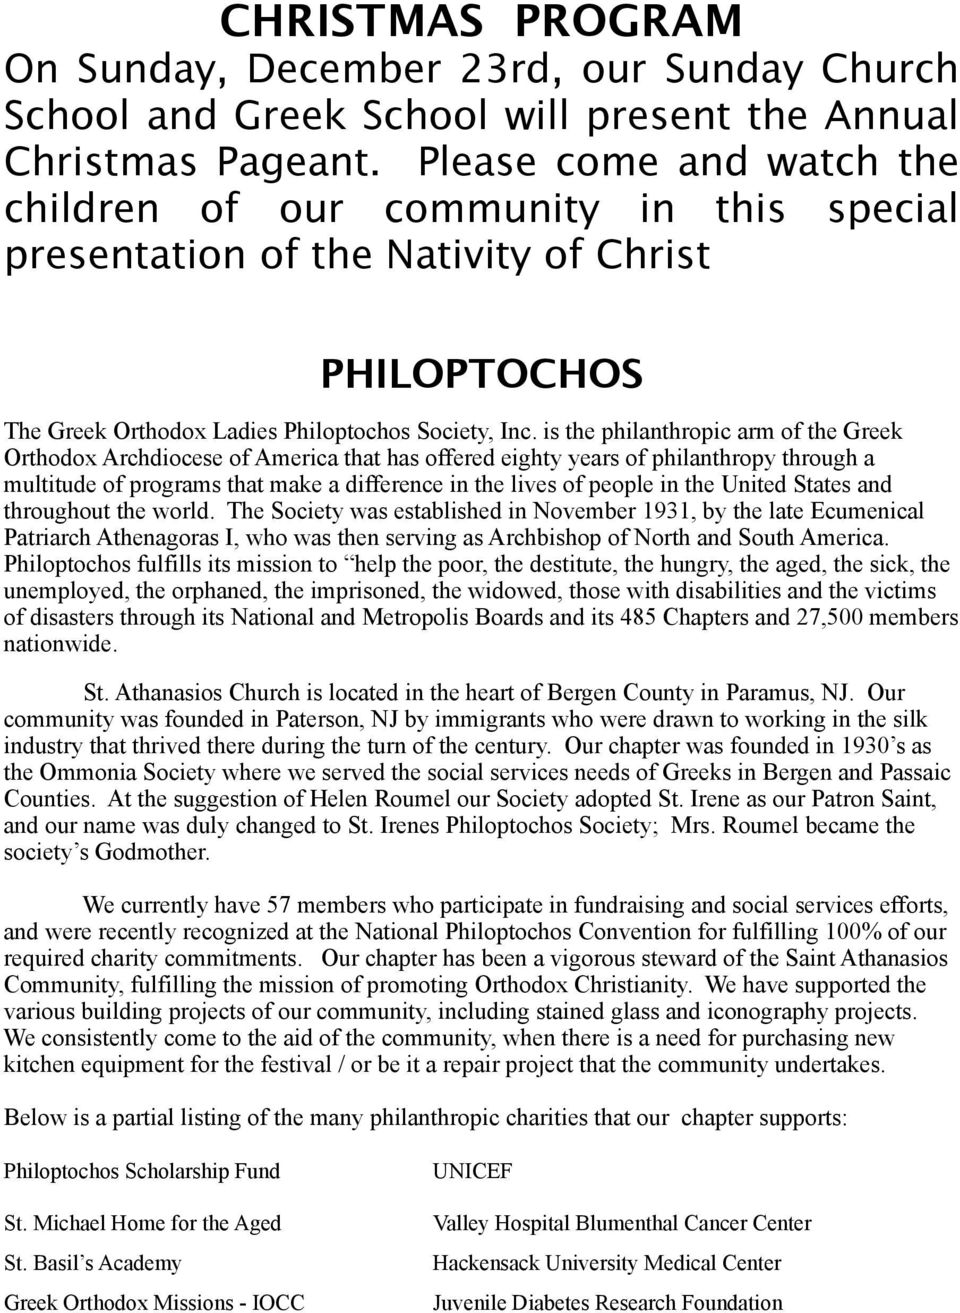 is the philanthropic arm of the Greek Orthodox Archdiocese of America that has offered eighty years of philanthropy through a multitude of programs that make a difference in the lives of people in